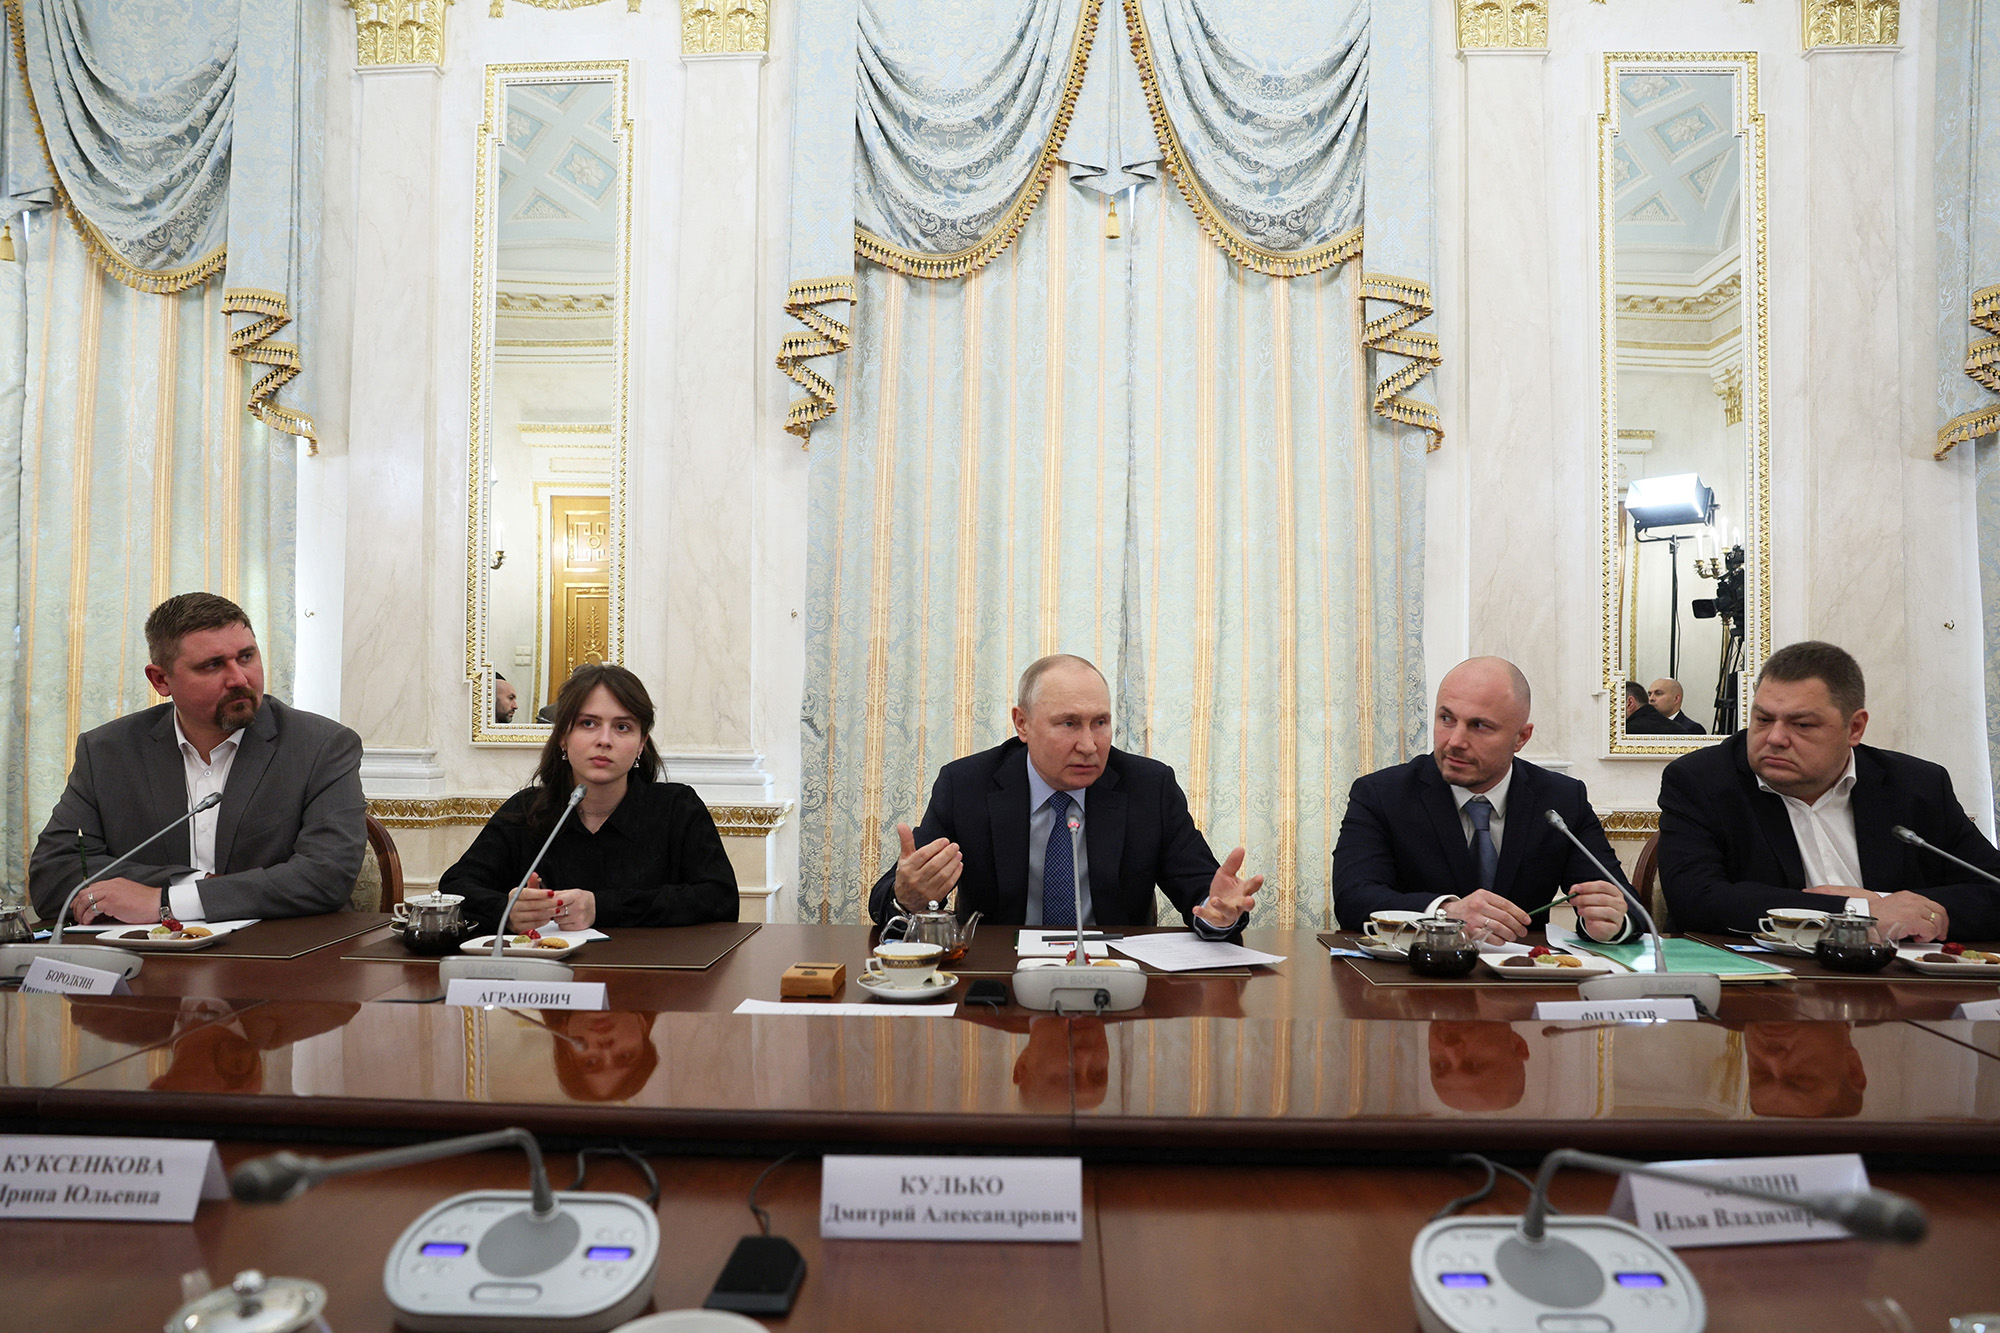 Russian President Vladimir Putin, center, attends a meeting with war correspondents at the Kremlin in Moscow, Russia, on June 13.